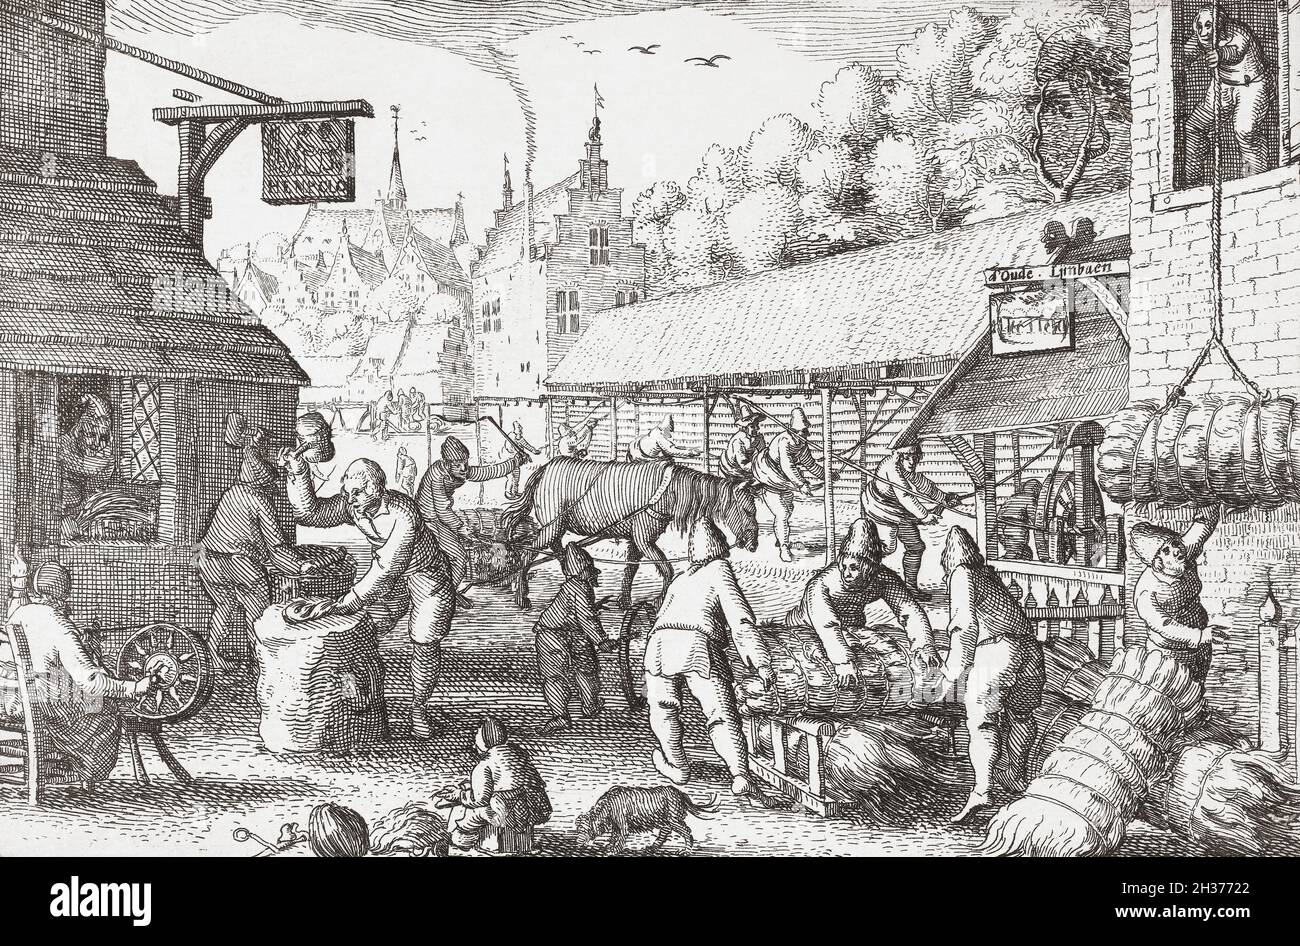 Dutch villagers in the early 17th century working at the town industry of rope making from locally grown hemp.  After a print by Claes Jansz Visscher (II). Stock Photo